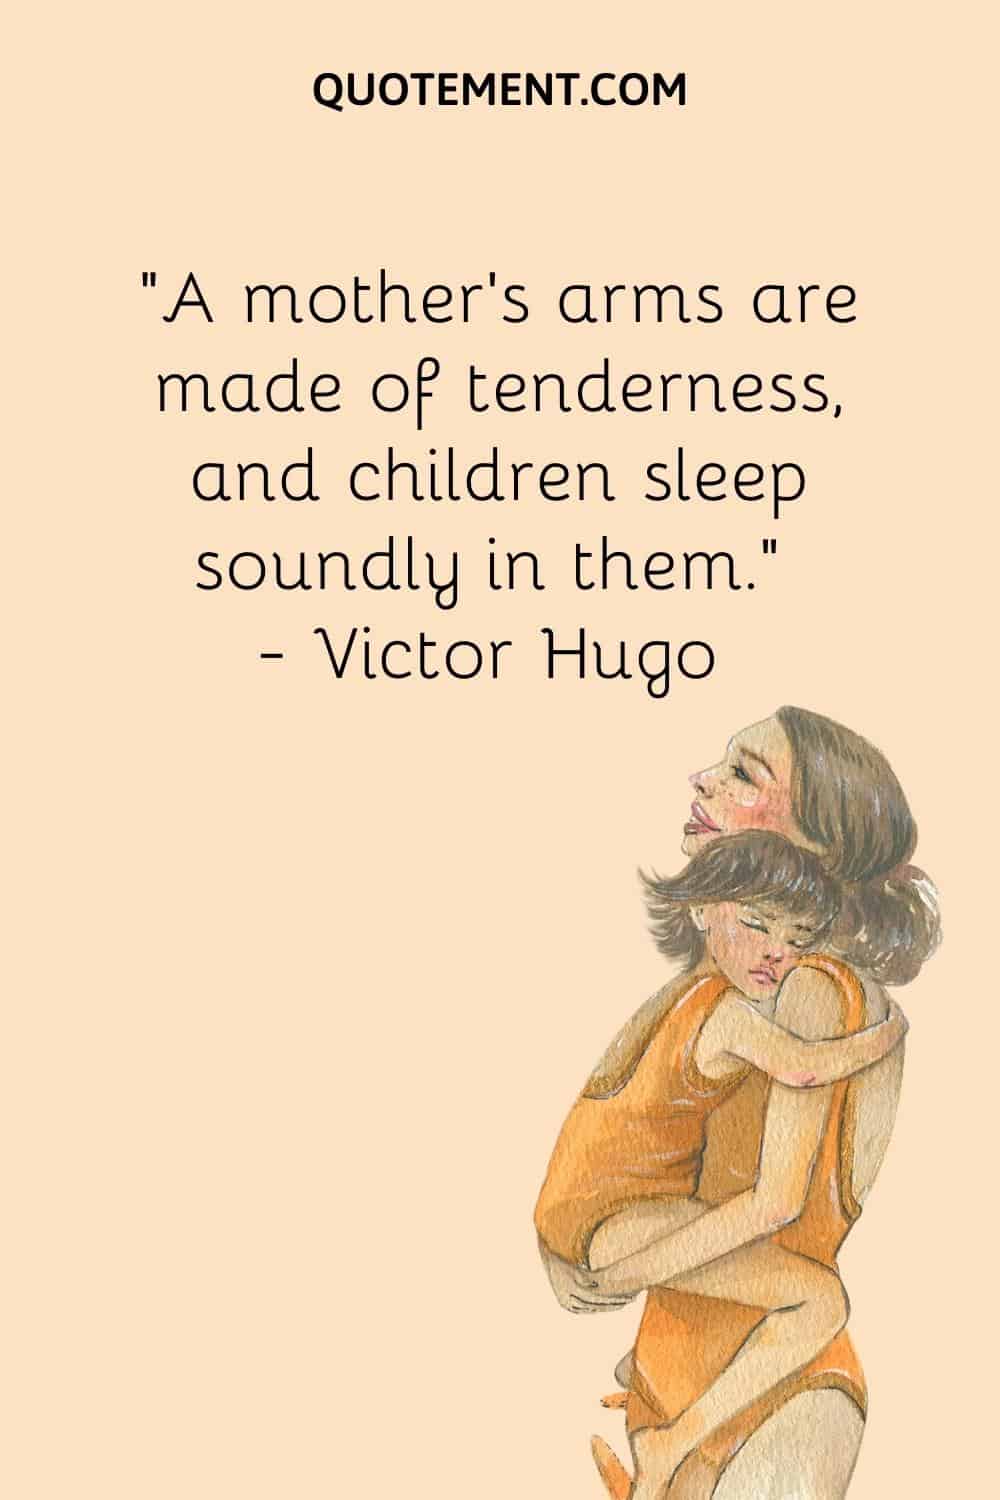 “A mother’s arms are made of tenderness, and children sleep soundly in them.” ― Victor Hugo